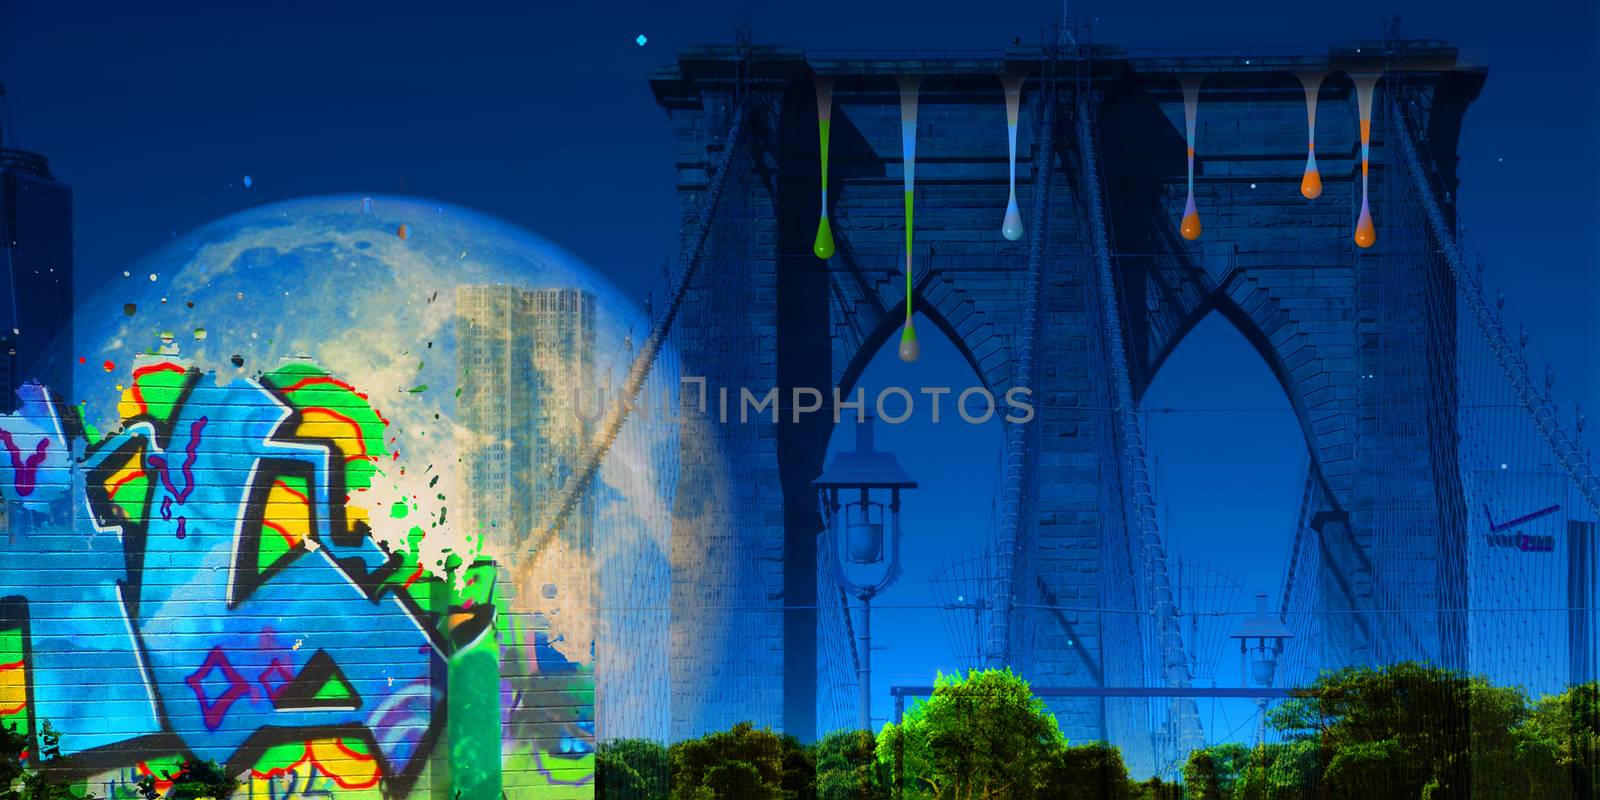 Surreal digital art. Brooklyn bridge on New York's cityscape. Giant moon, pieces of graffiti and paint drops. 3D rendering